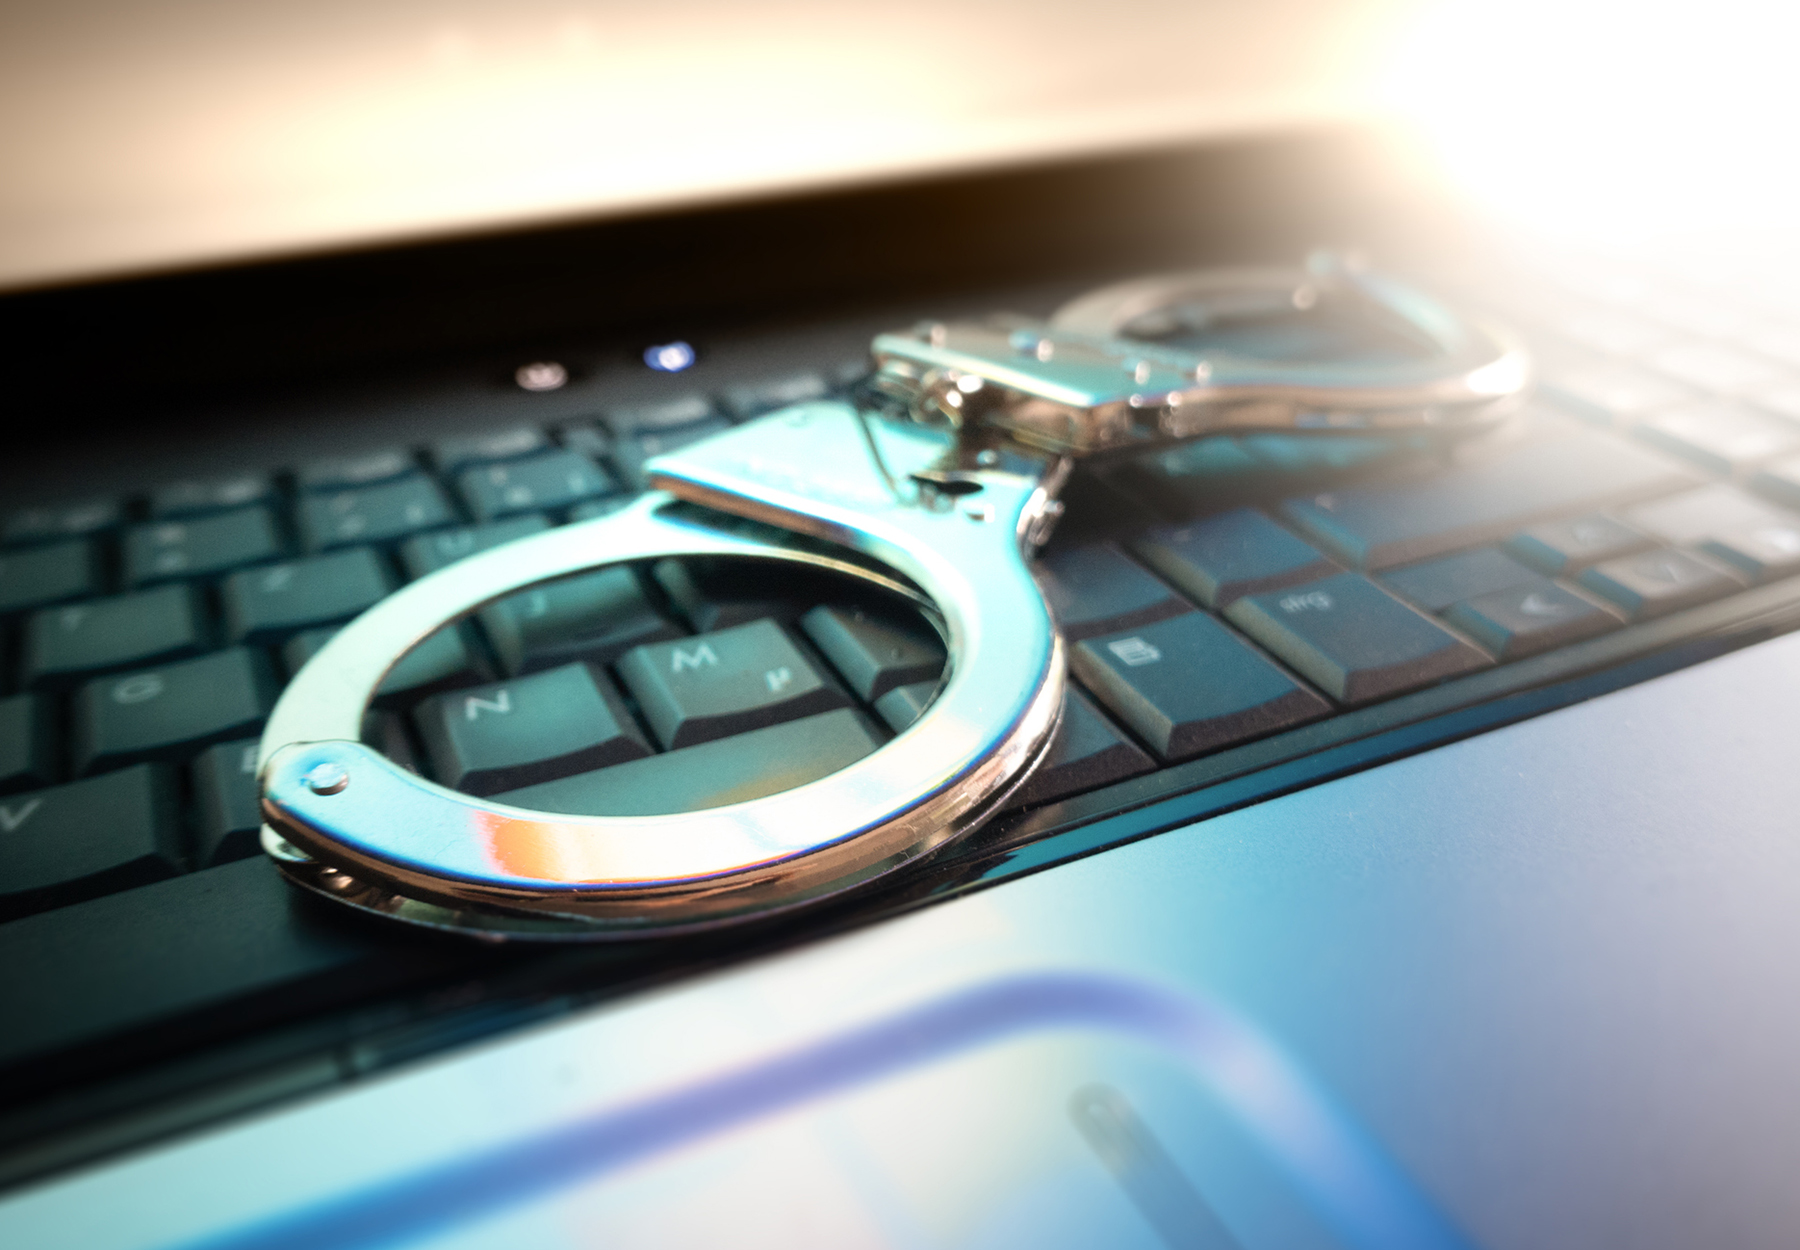 Stock image of handcuffs on computer keyboard to symbolize telemedicine fraud